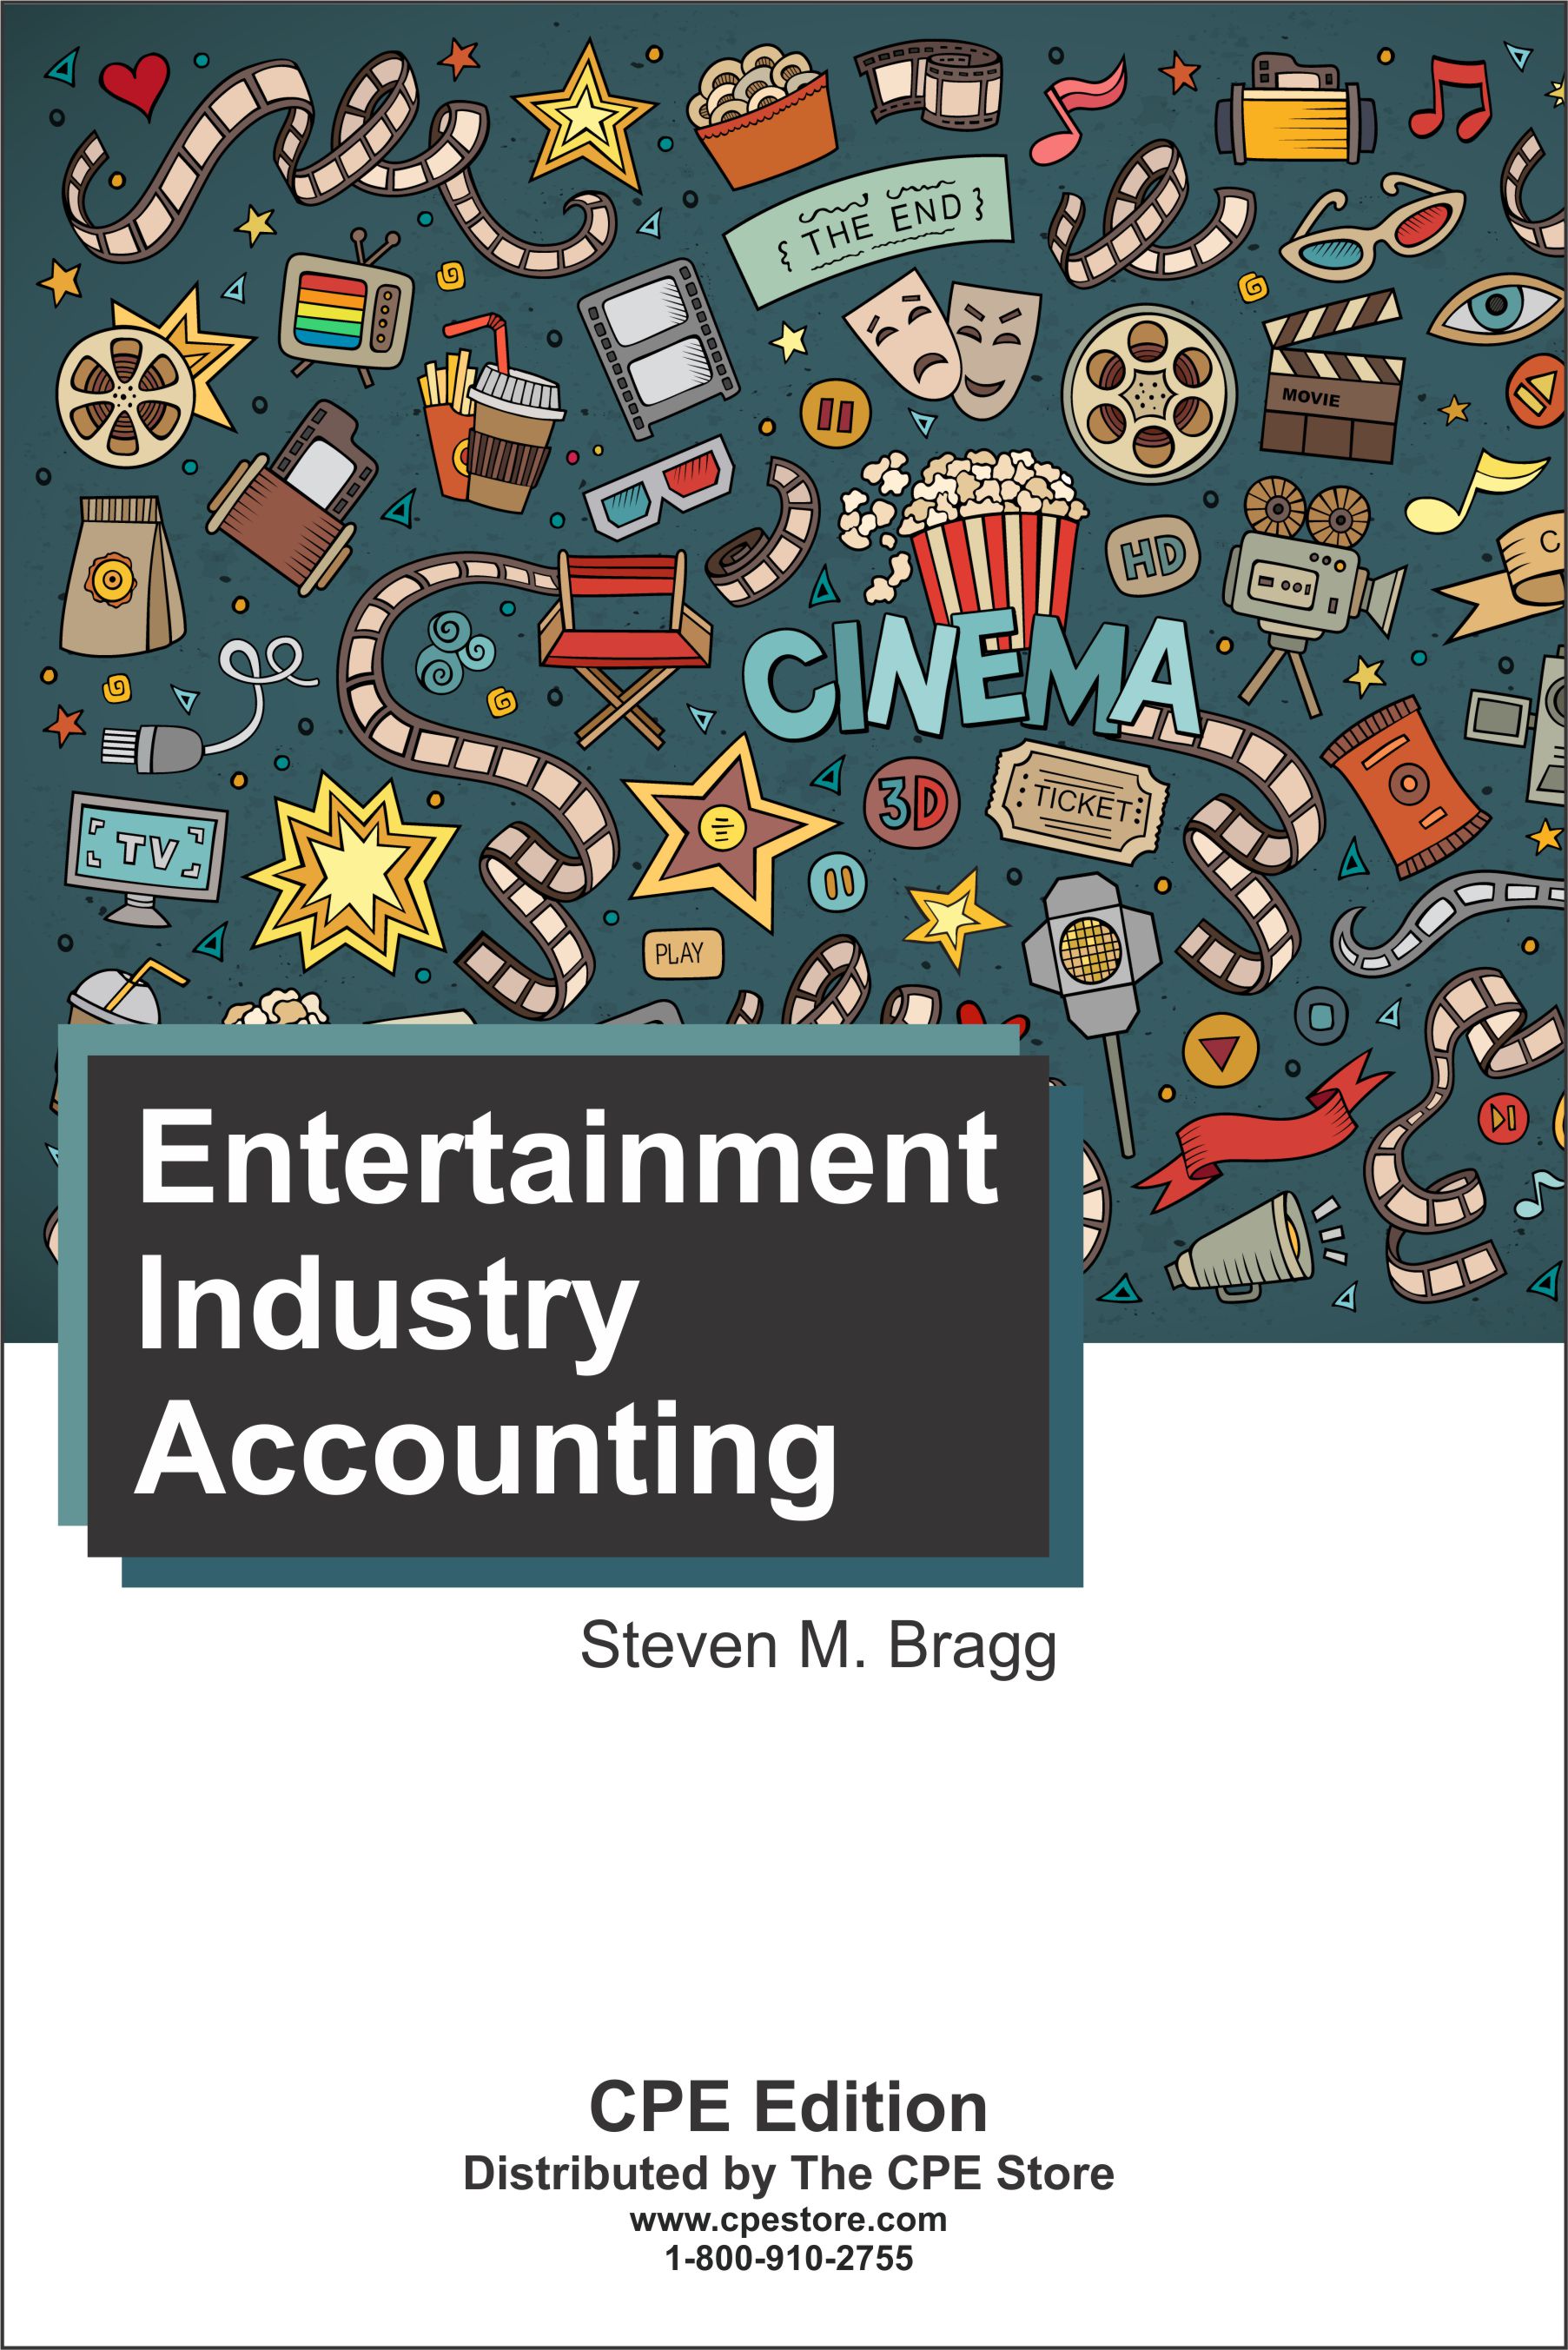 Entertainment Industry Accounting